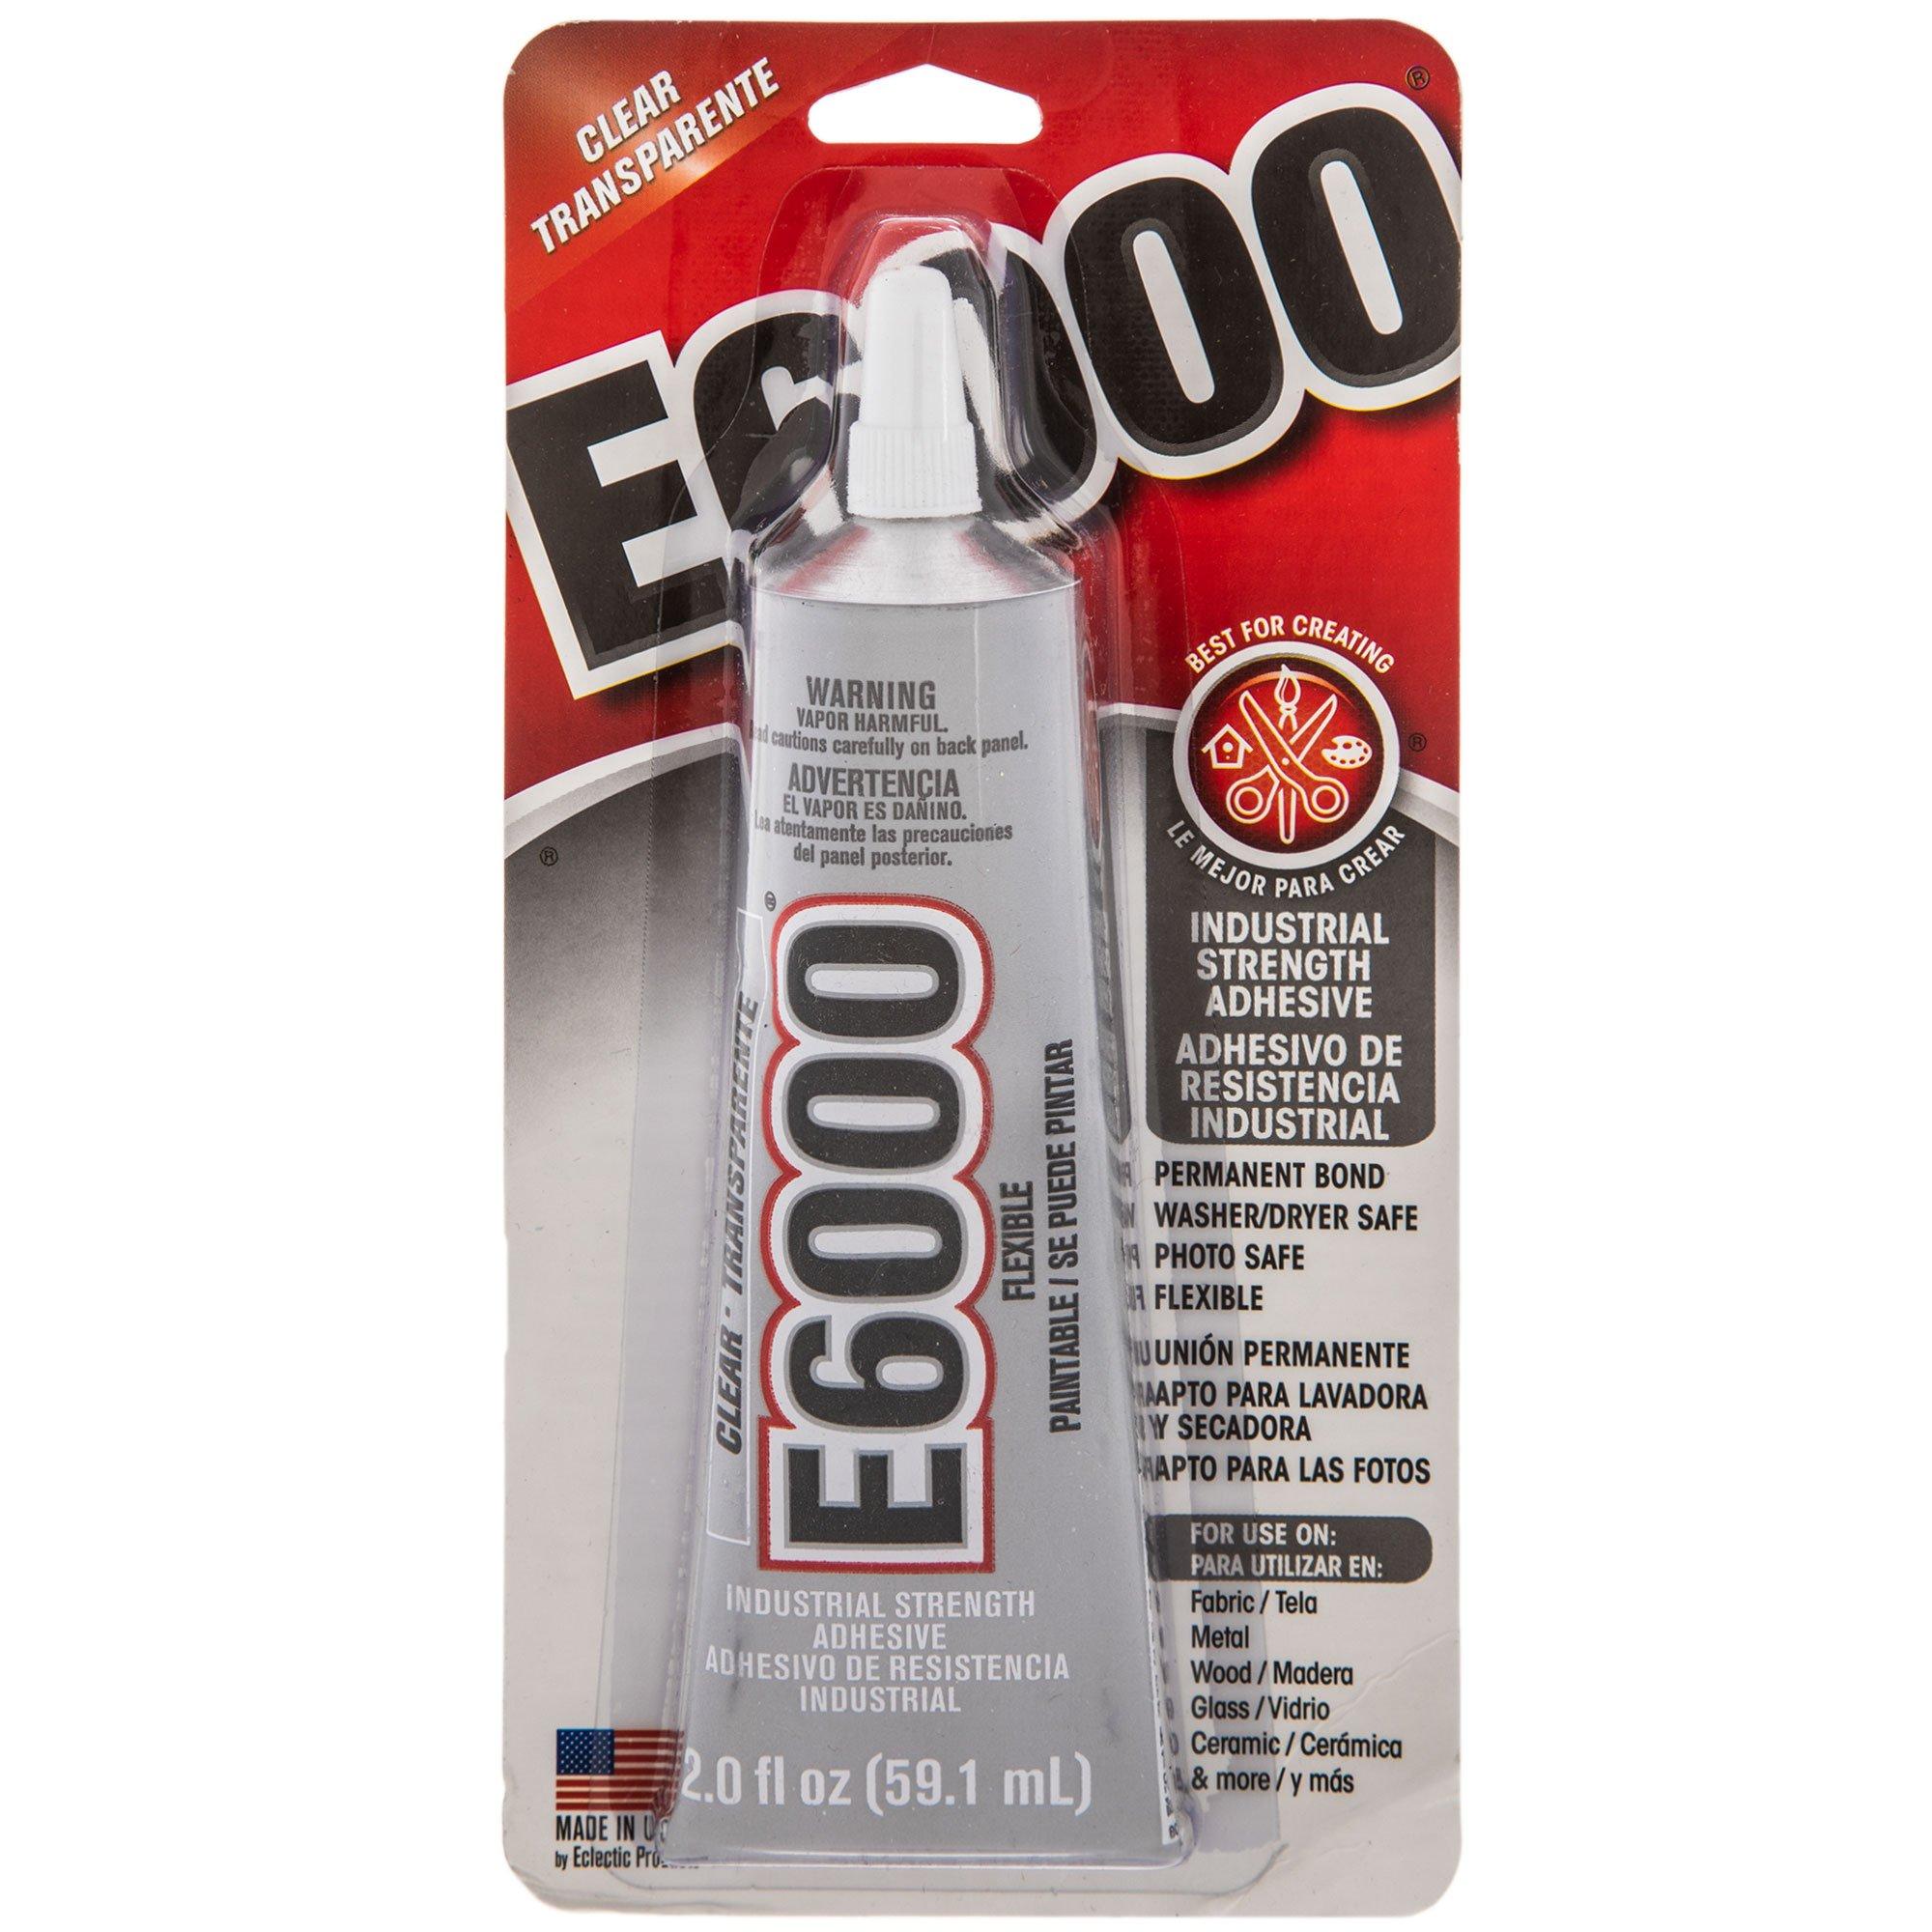 Which Types of E6000 do you use?